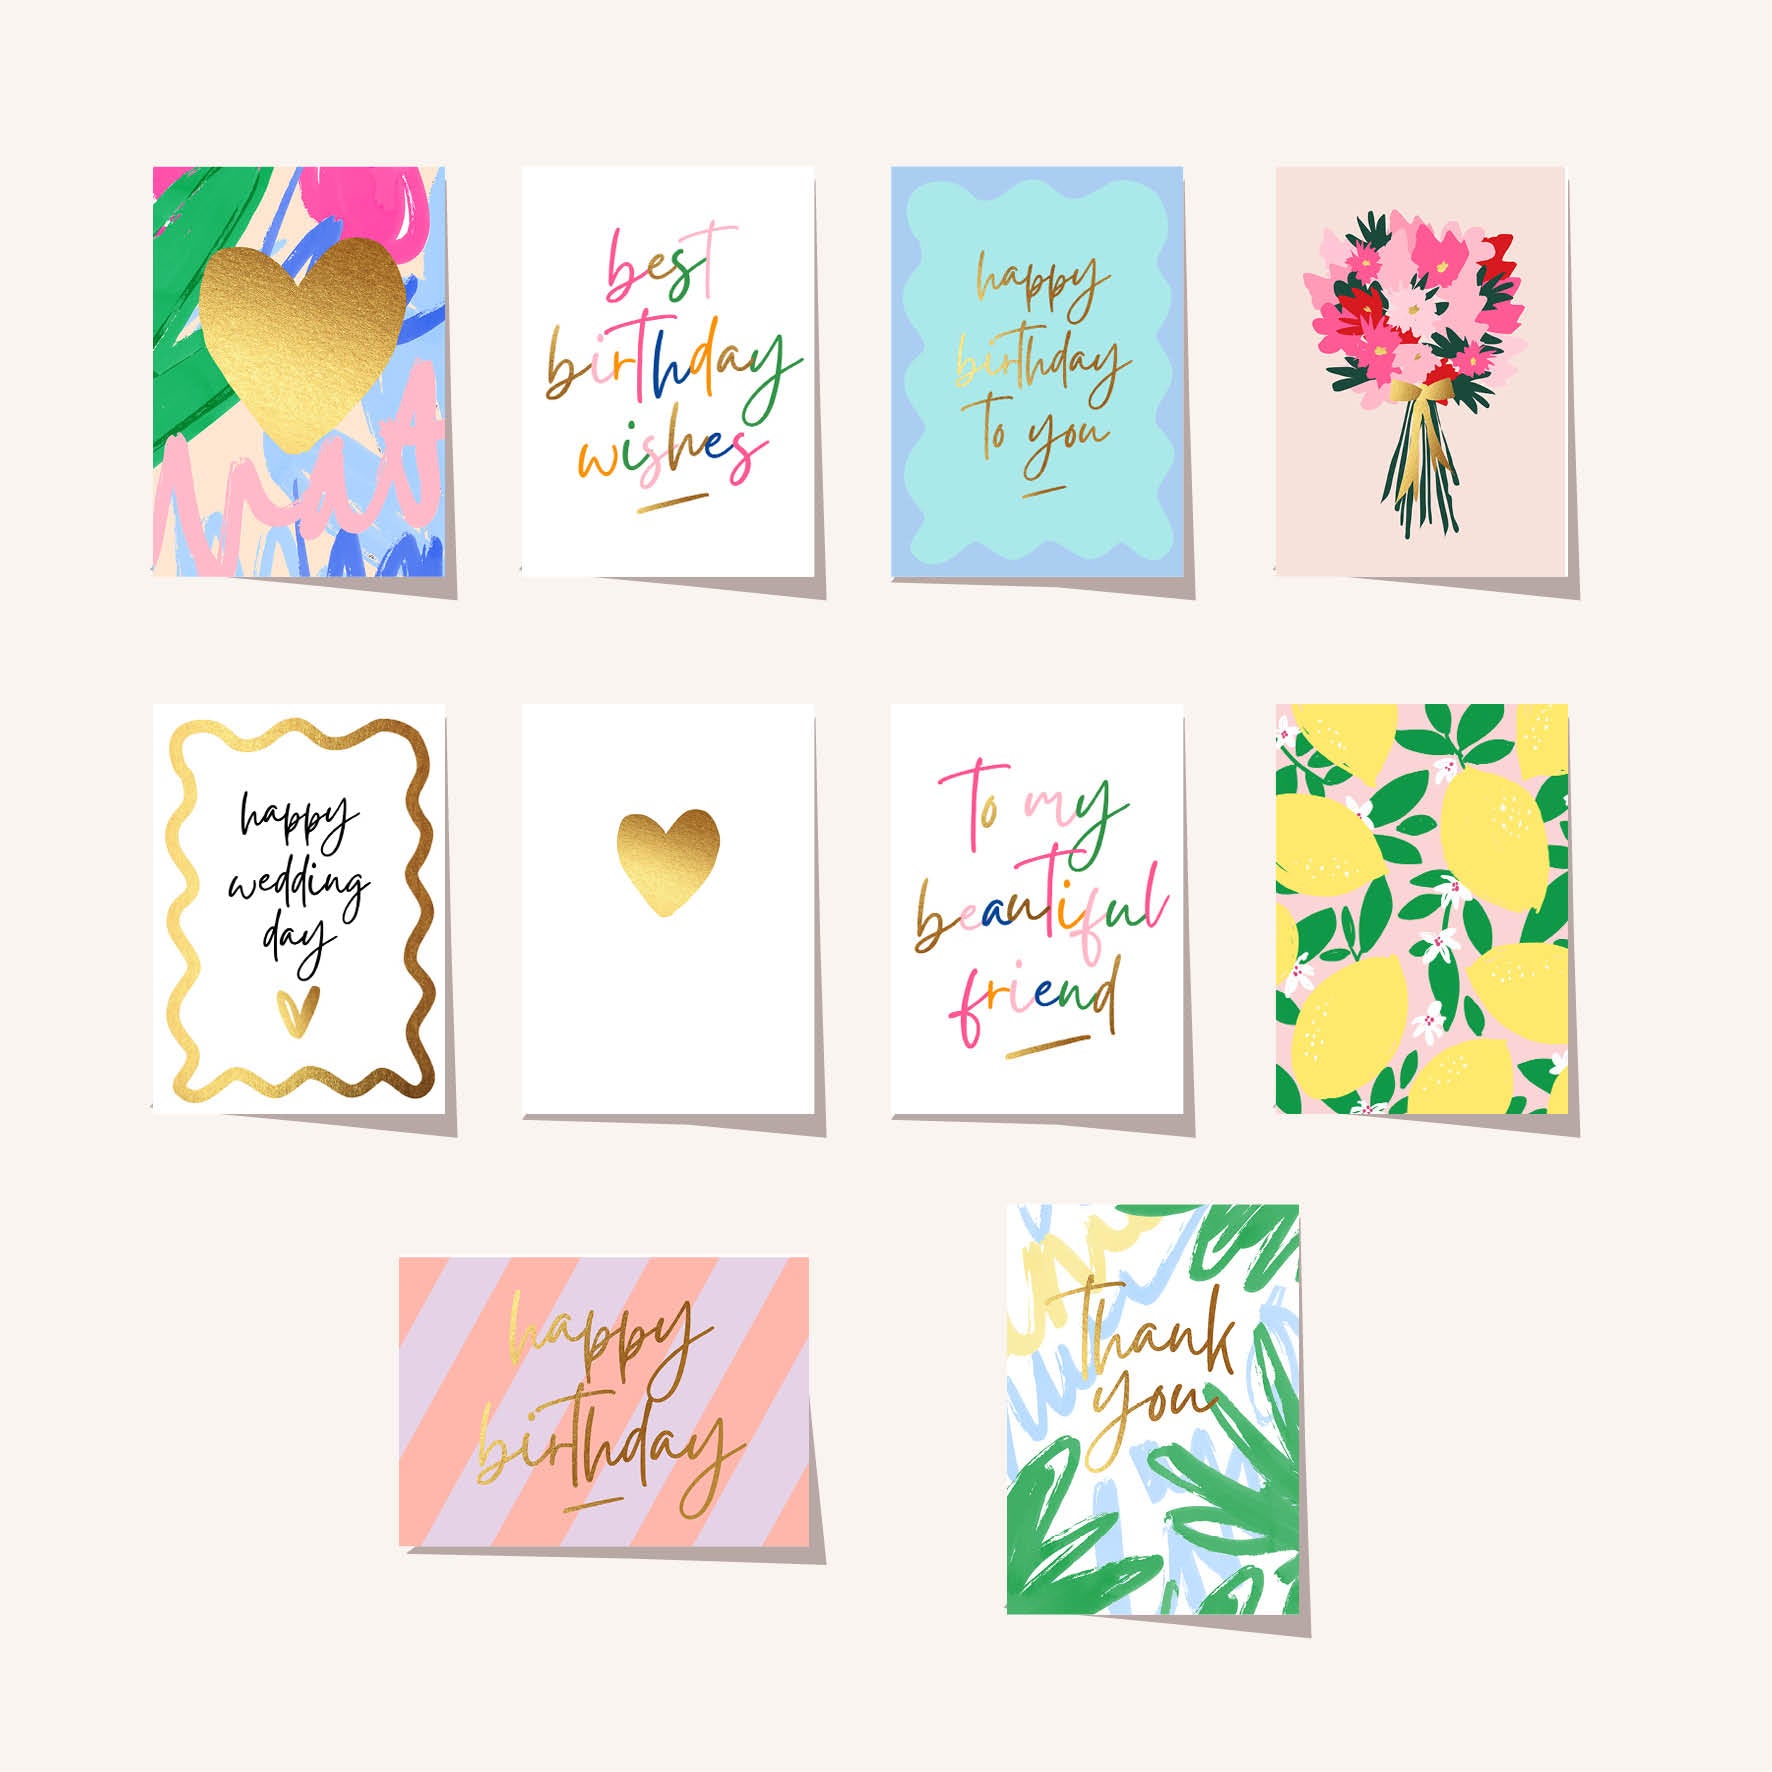 The Fave Bundle of 10 Assorted Cards